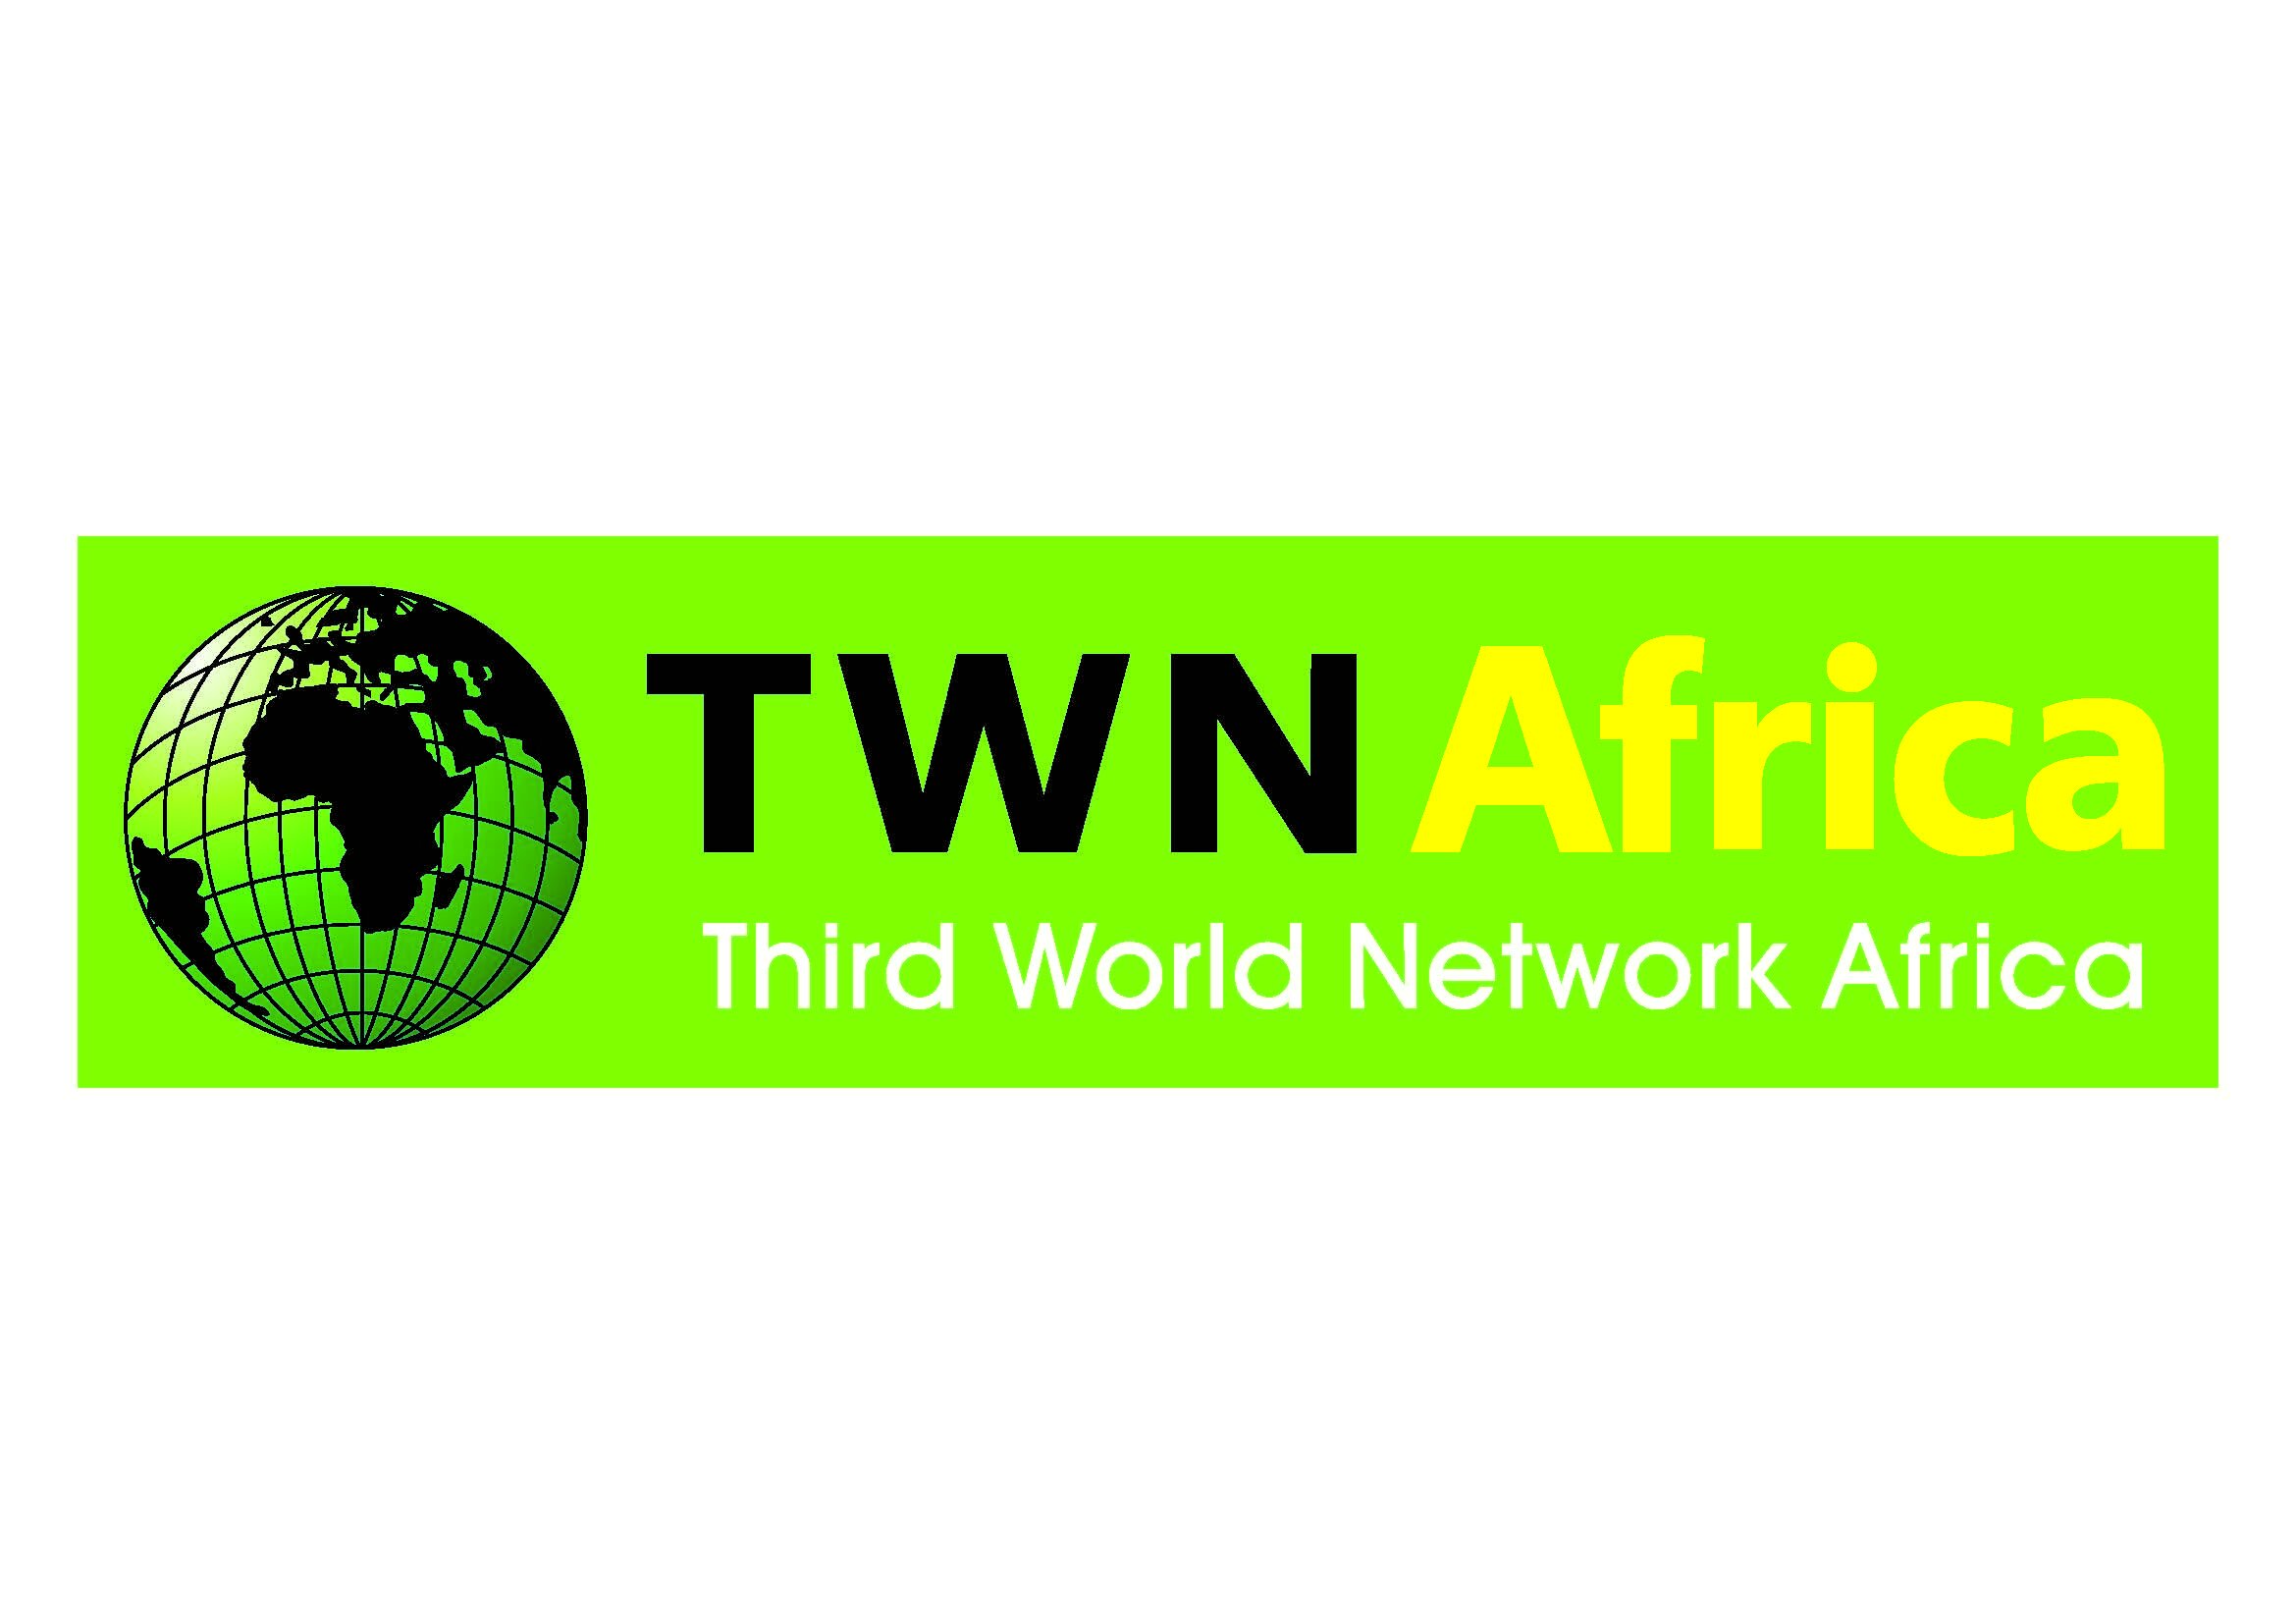 Official Twitter feed of TWN-Africa, an international network of groups & individuals who seek greater articulation of the needs & rights of the global South.